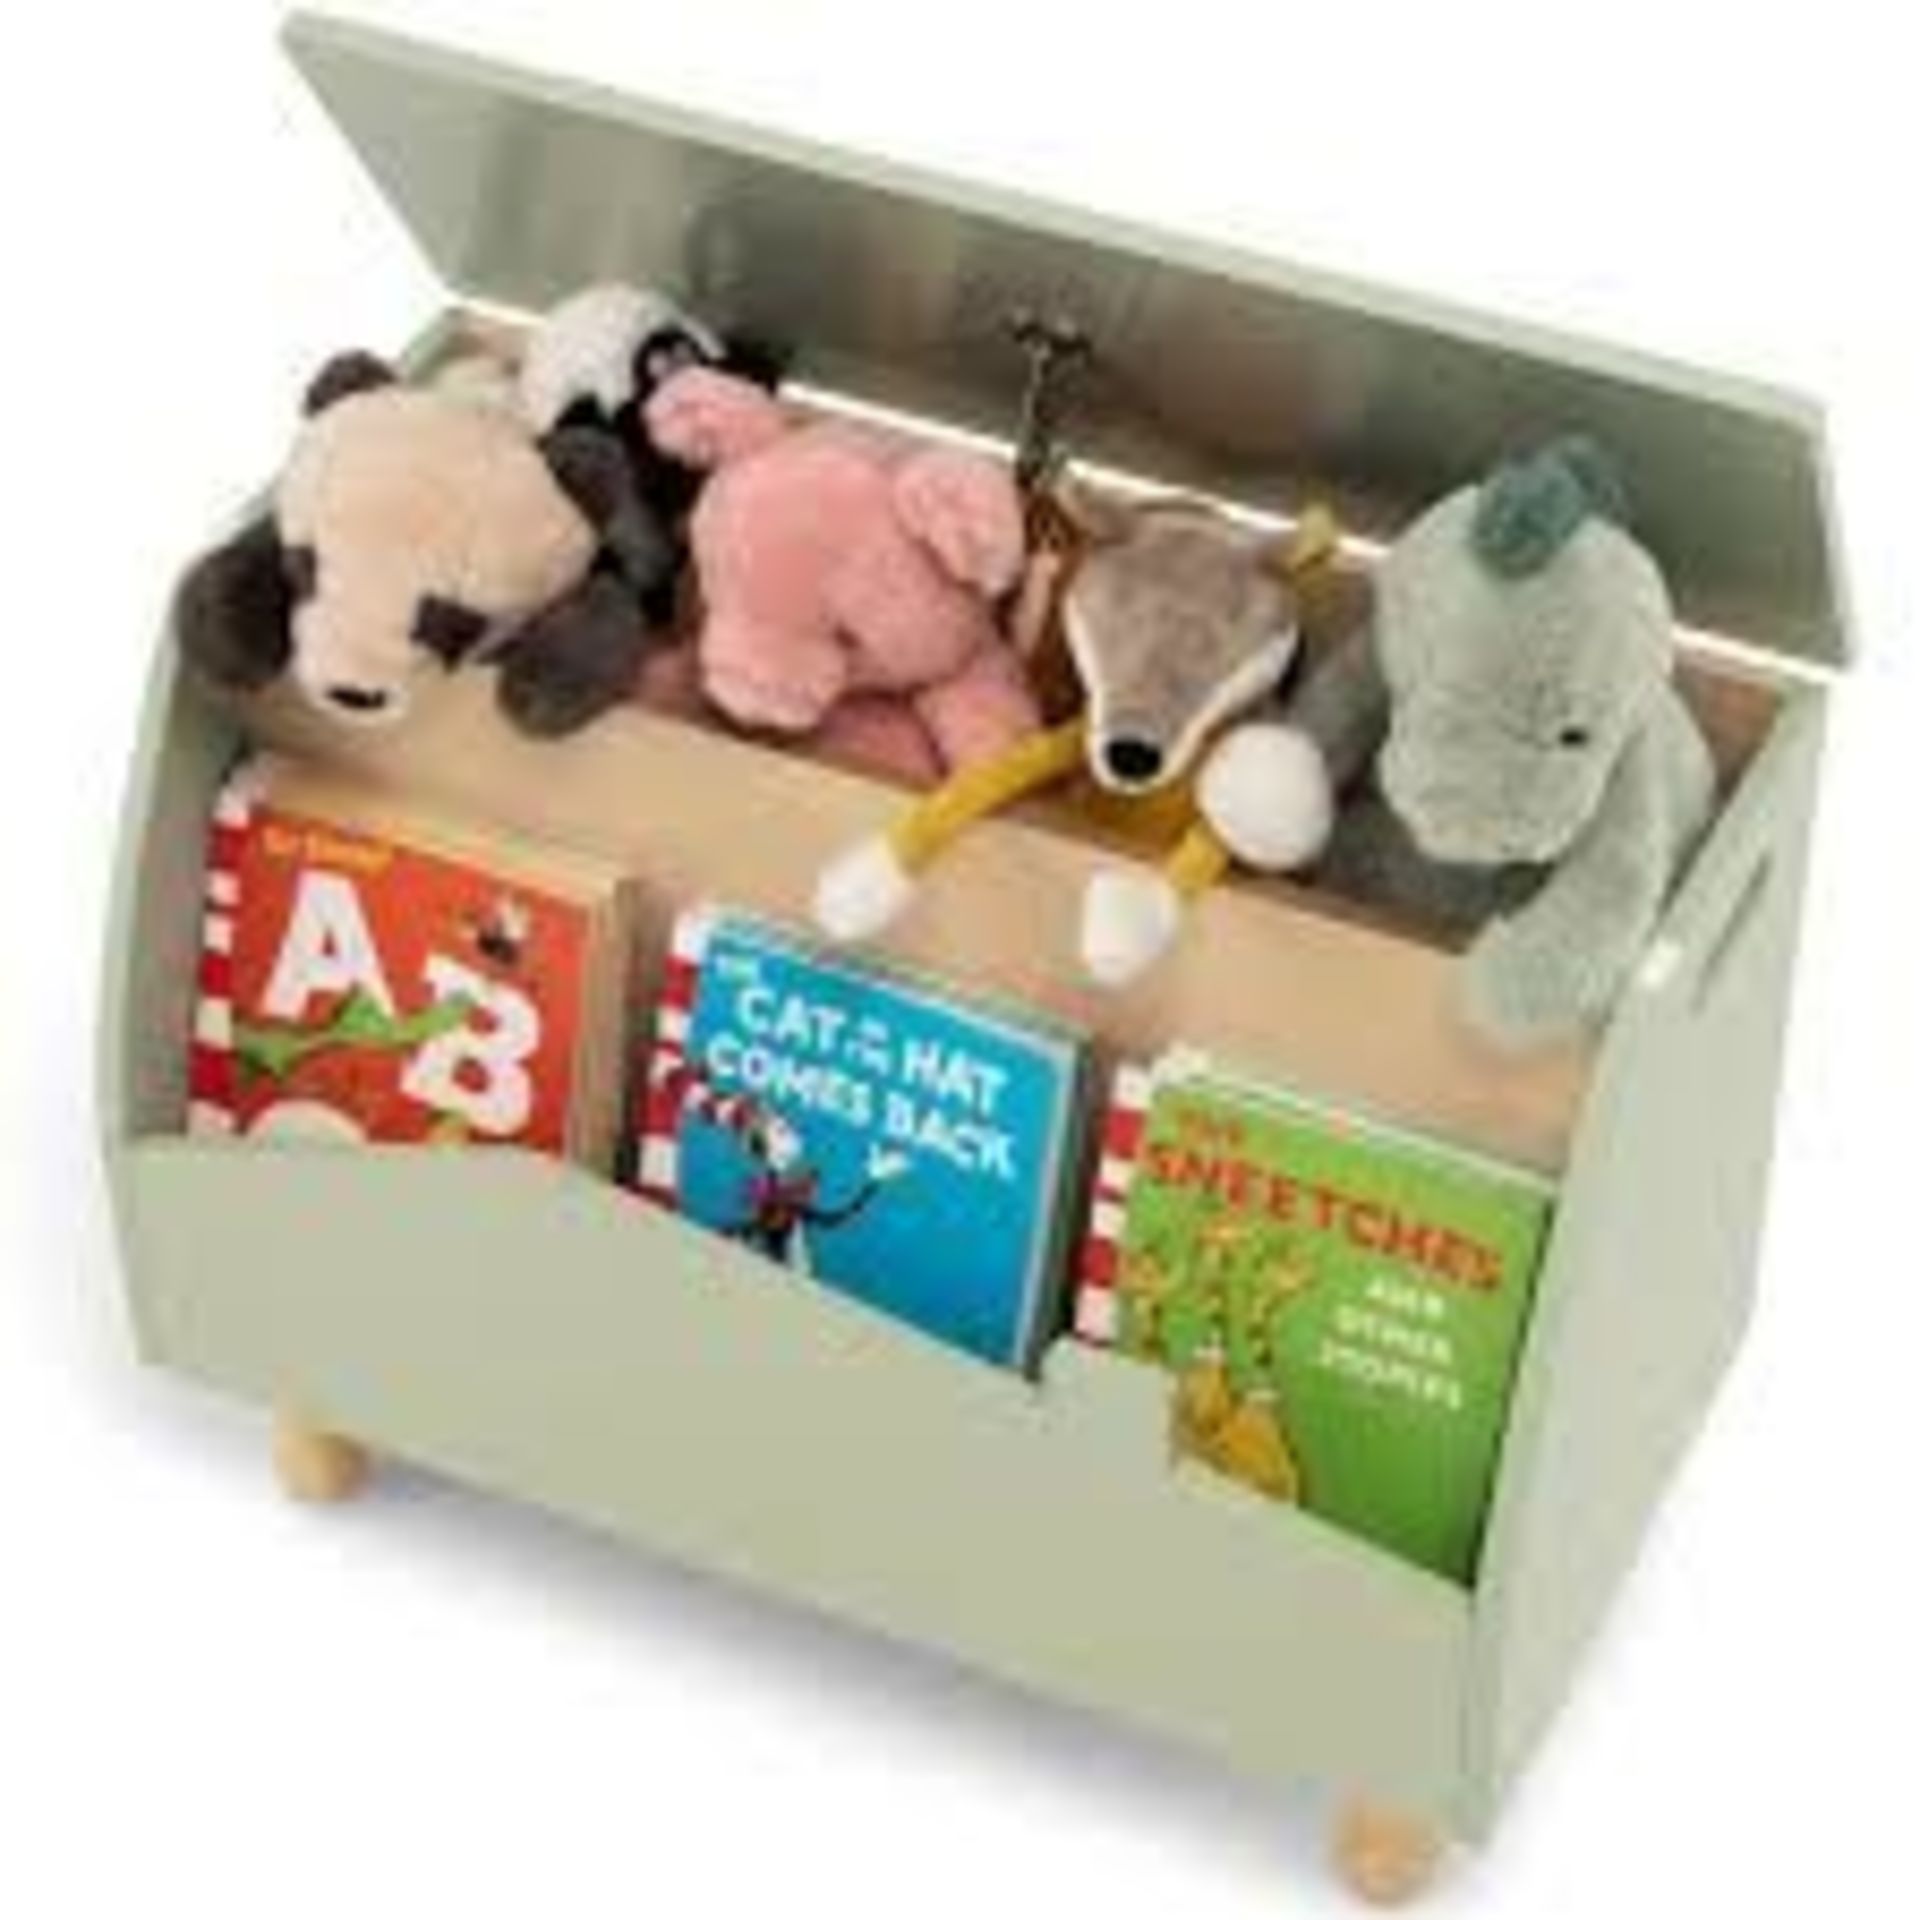 Kids Toy Box with Safety Hinge for Playroom-Green. - ER24. This toy box is made of sturdy MDF. The